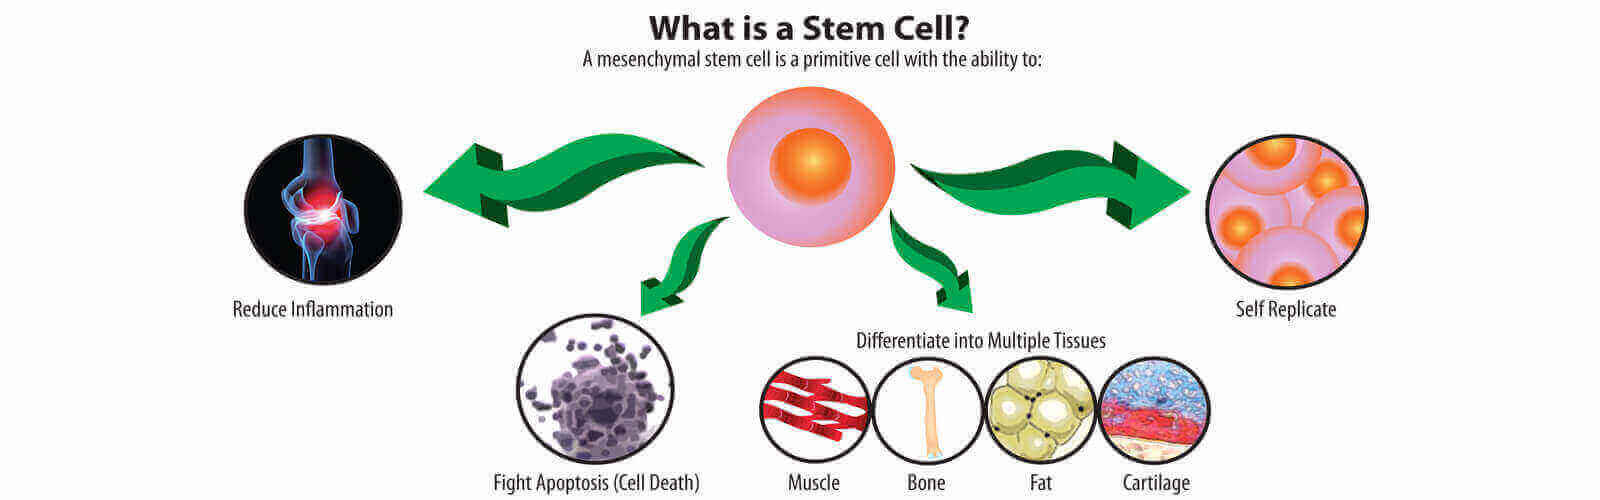 Stem Cell Treatment in Kingston Upon Hull